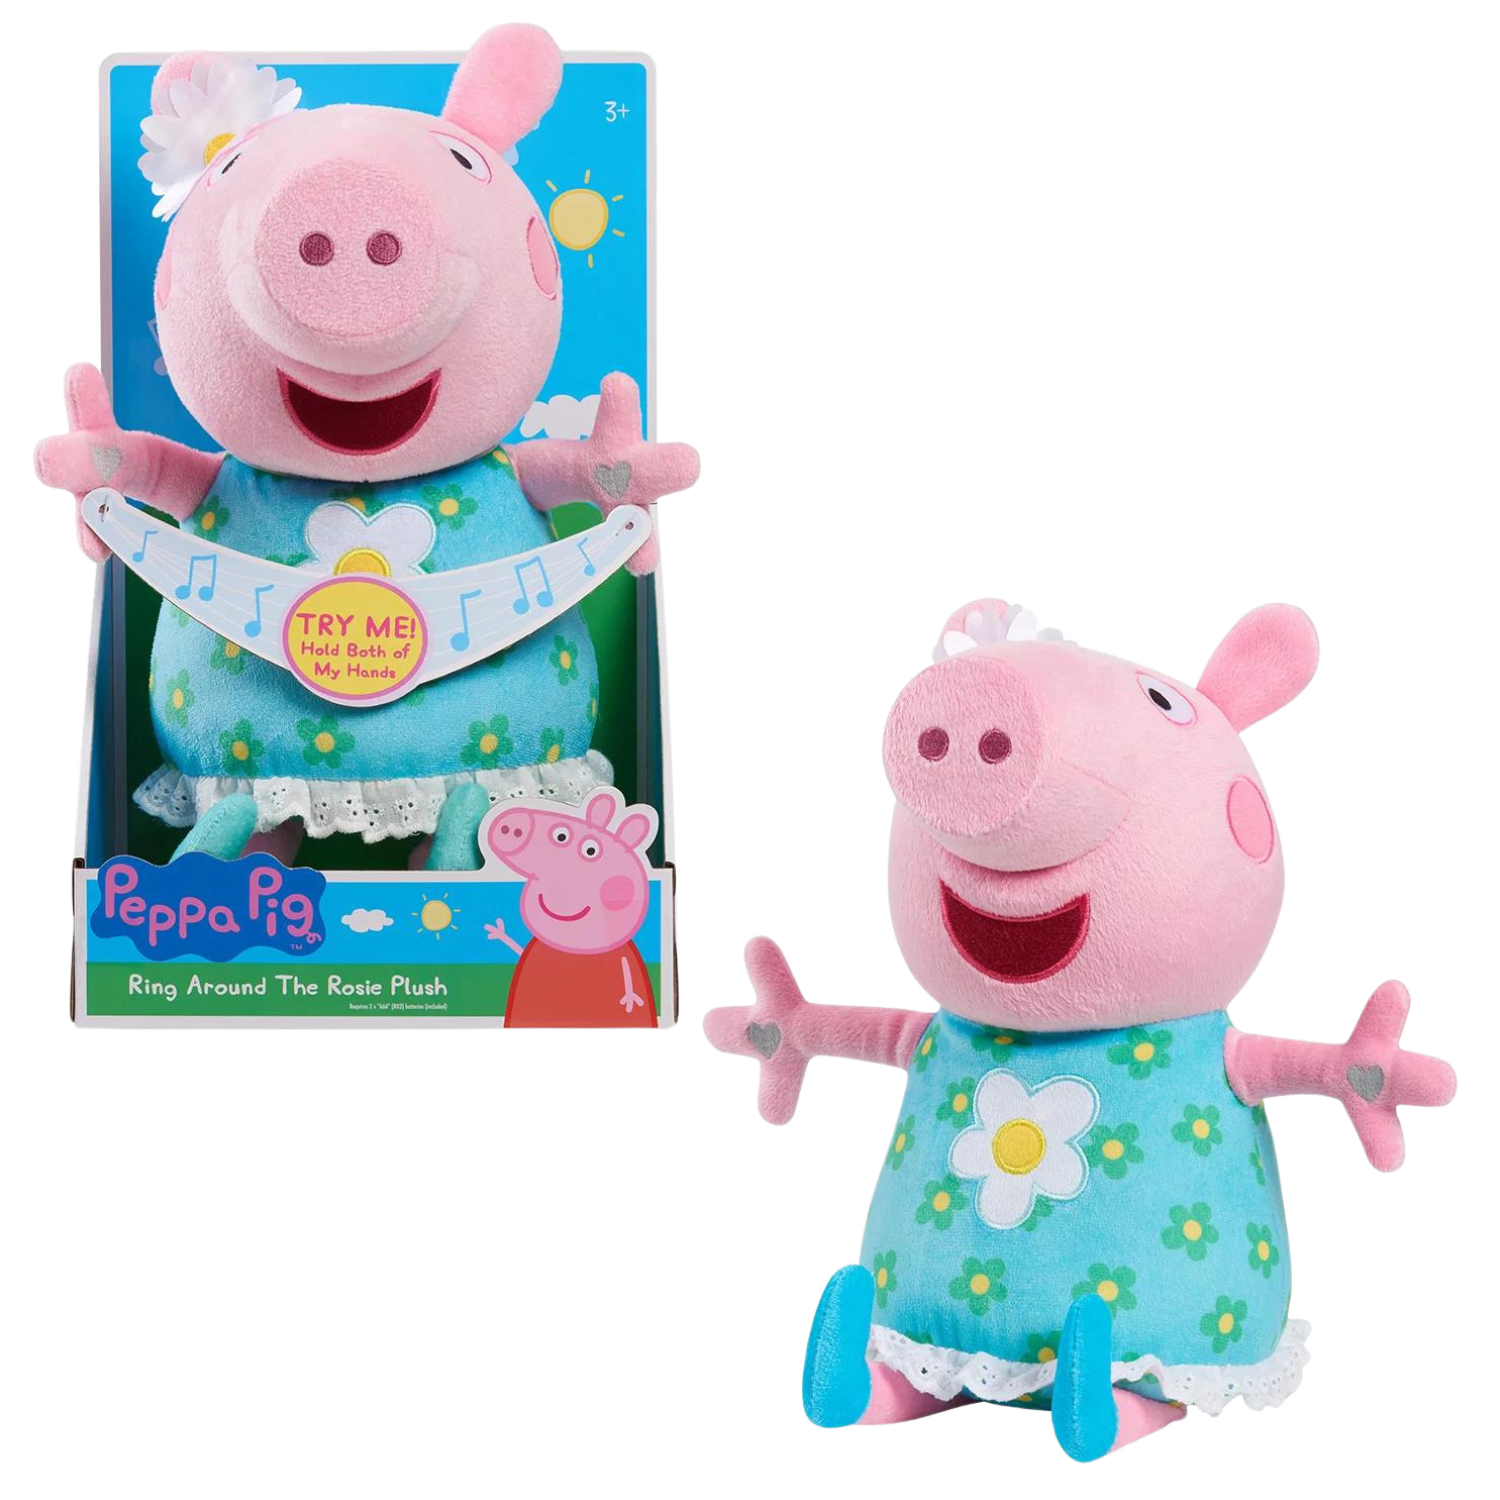 Personalized Peppa Pig Gifts at Gifts.com